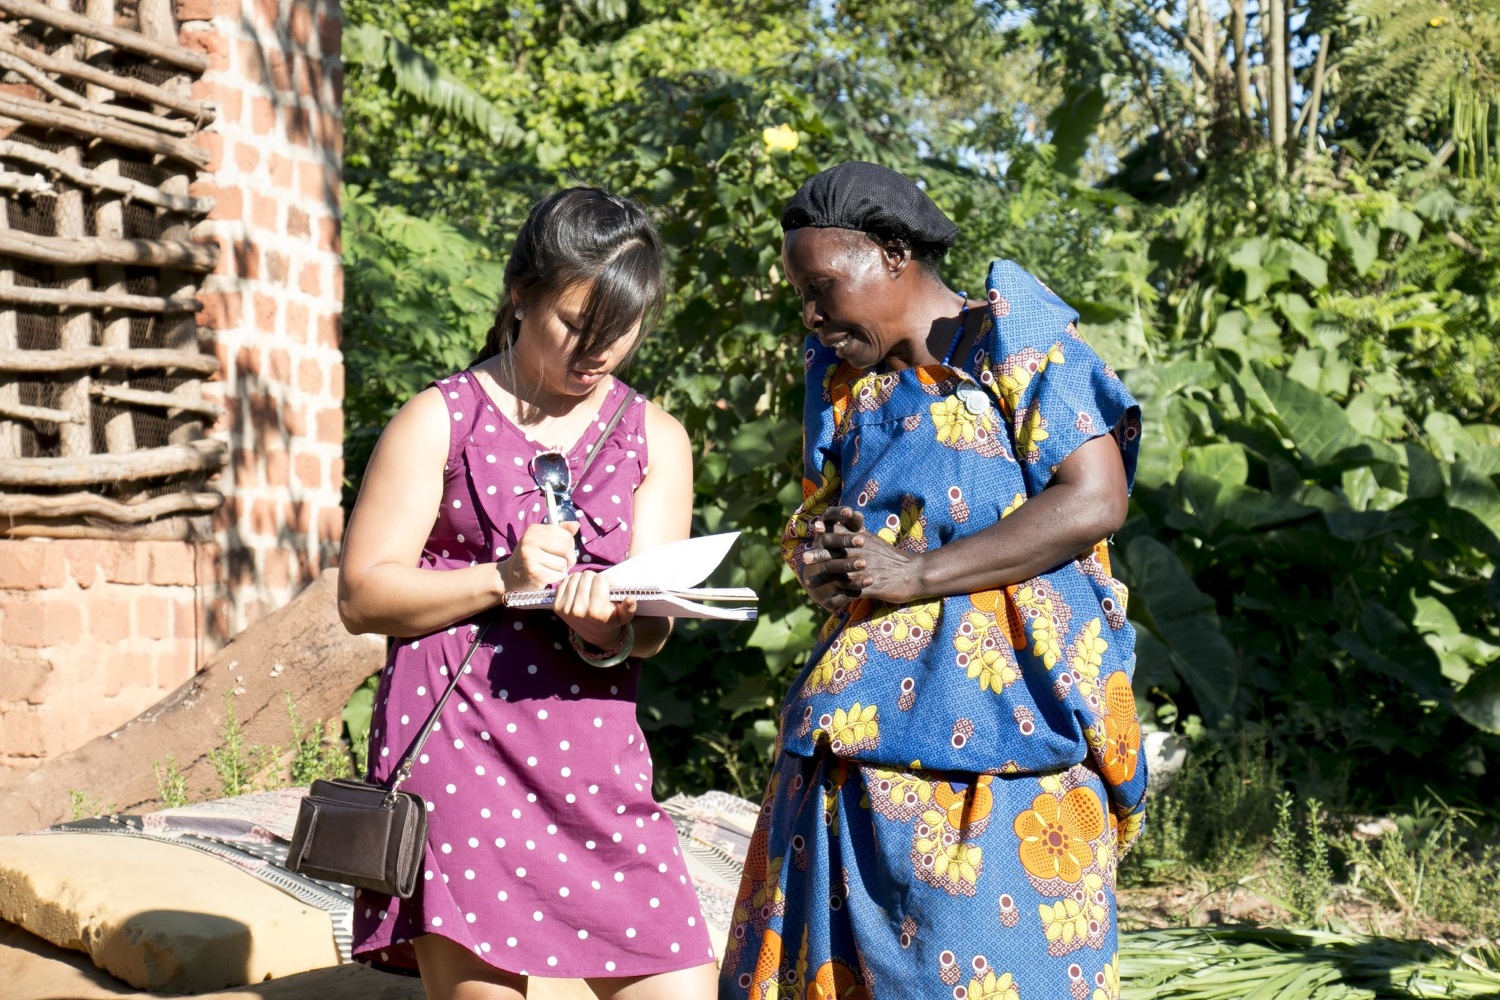 image: global health fellow with woman